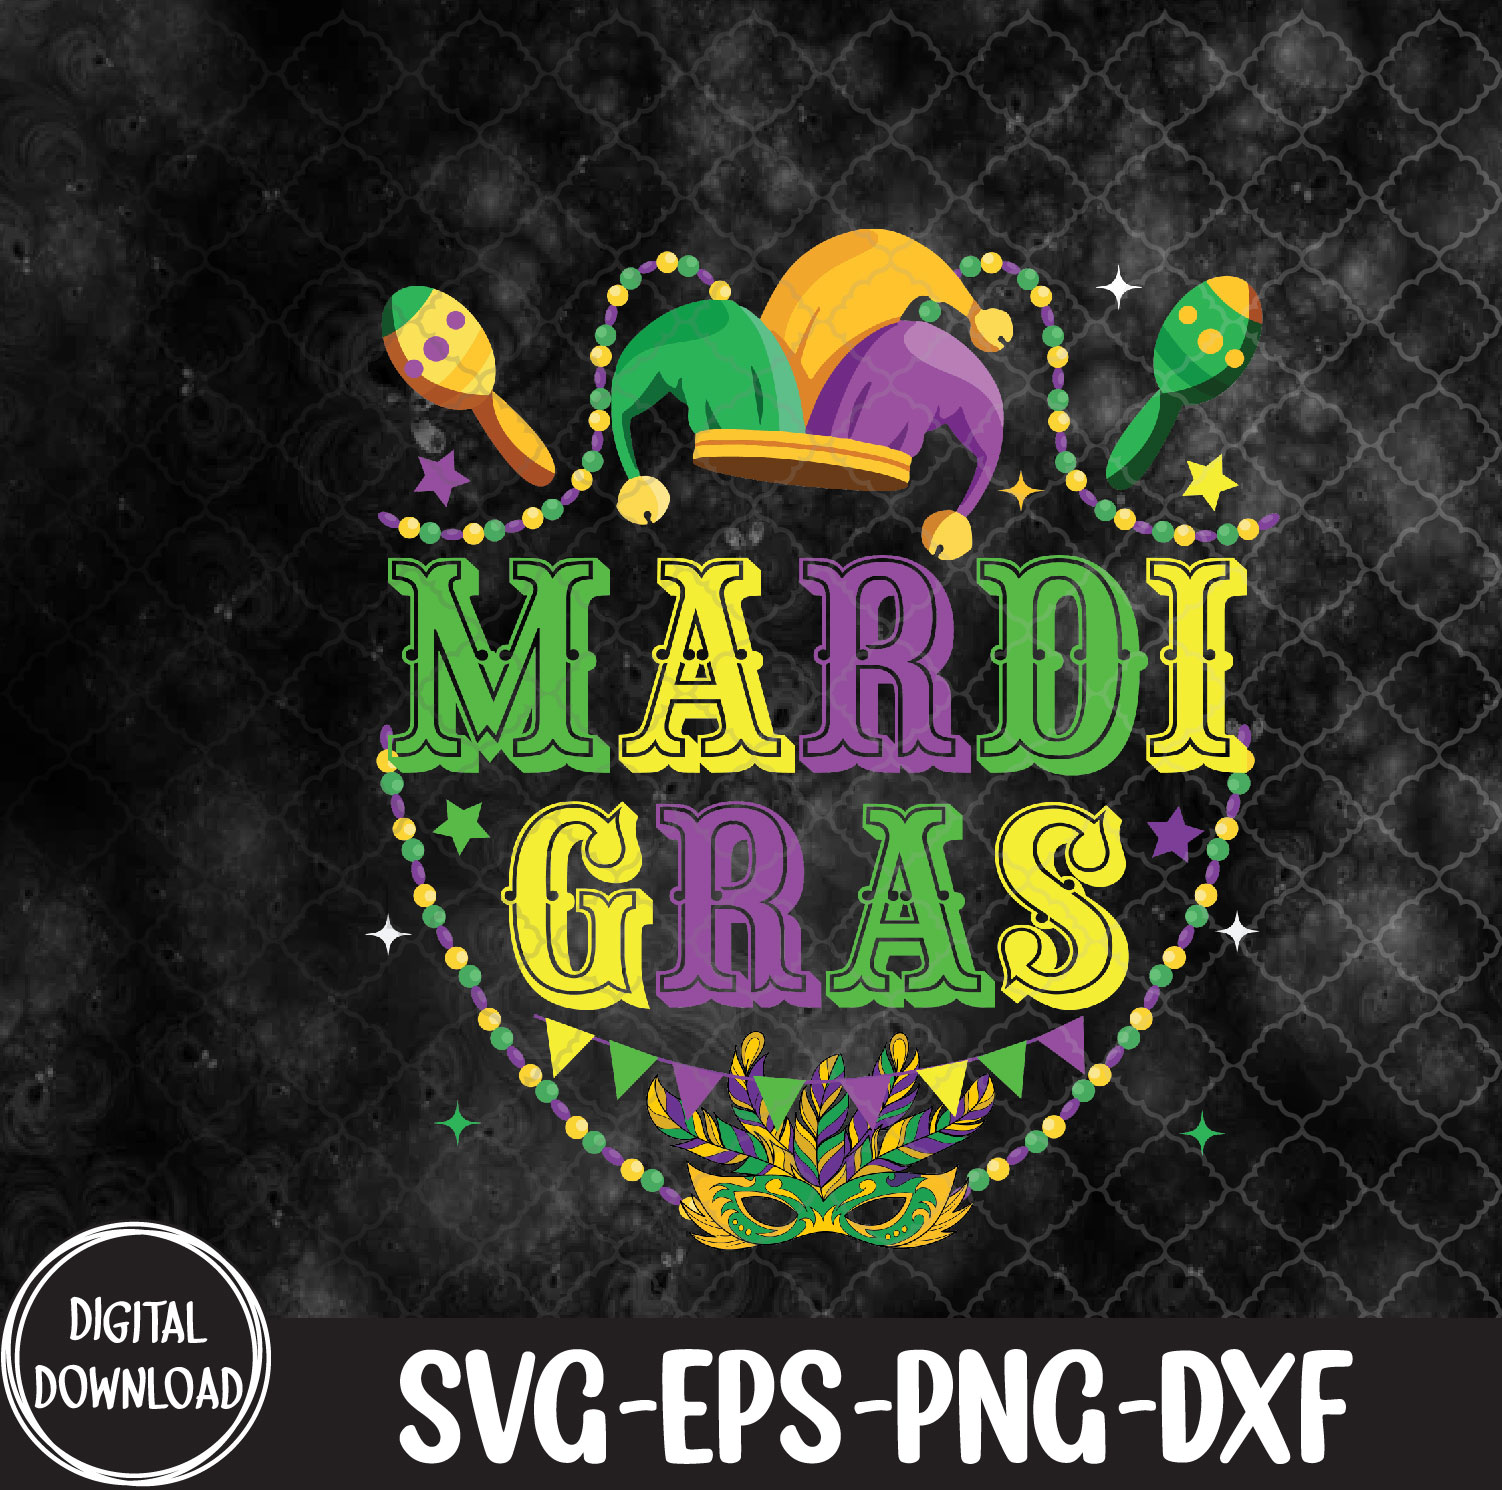 WTMNEW9file 09 93 Mardi Gras Party Hat Costume Clothes, Mardi Gras svg, Svg, Eps, Png, Dxf